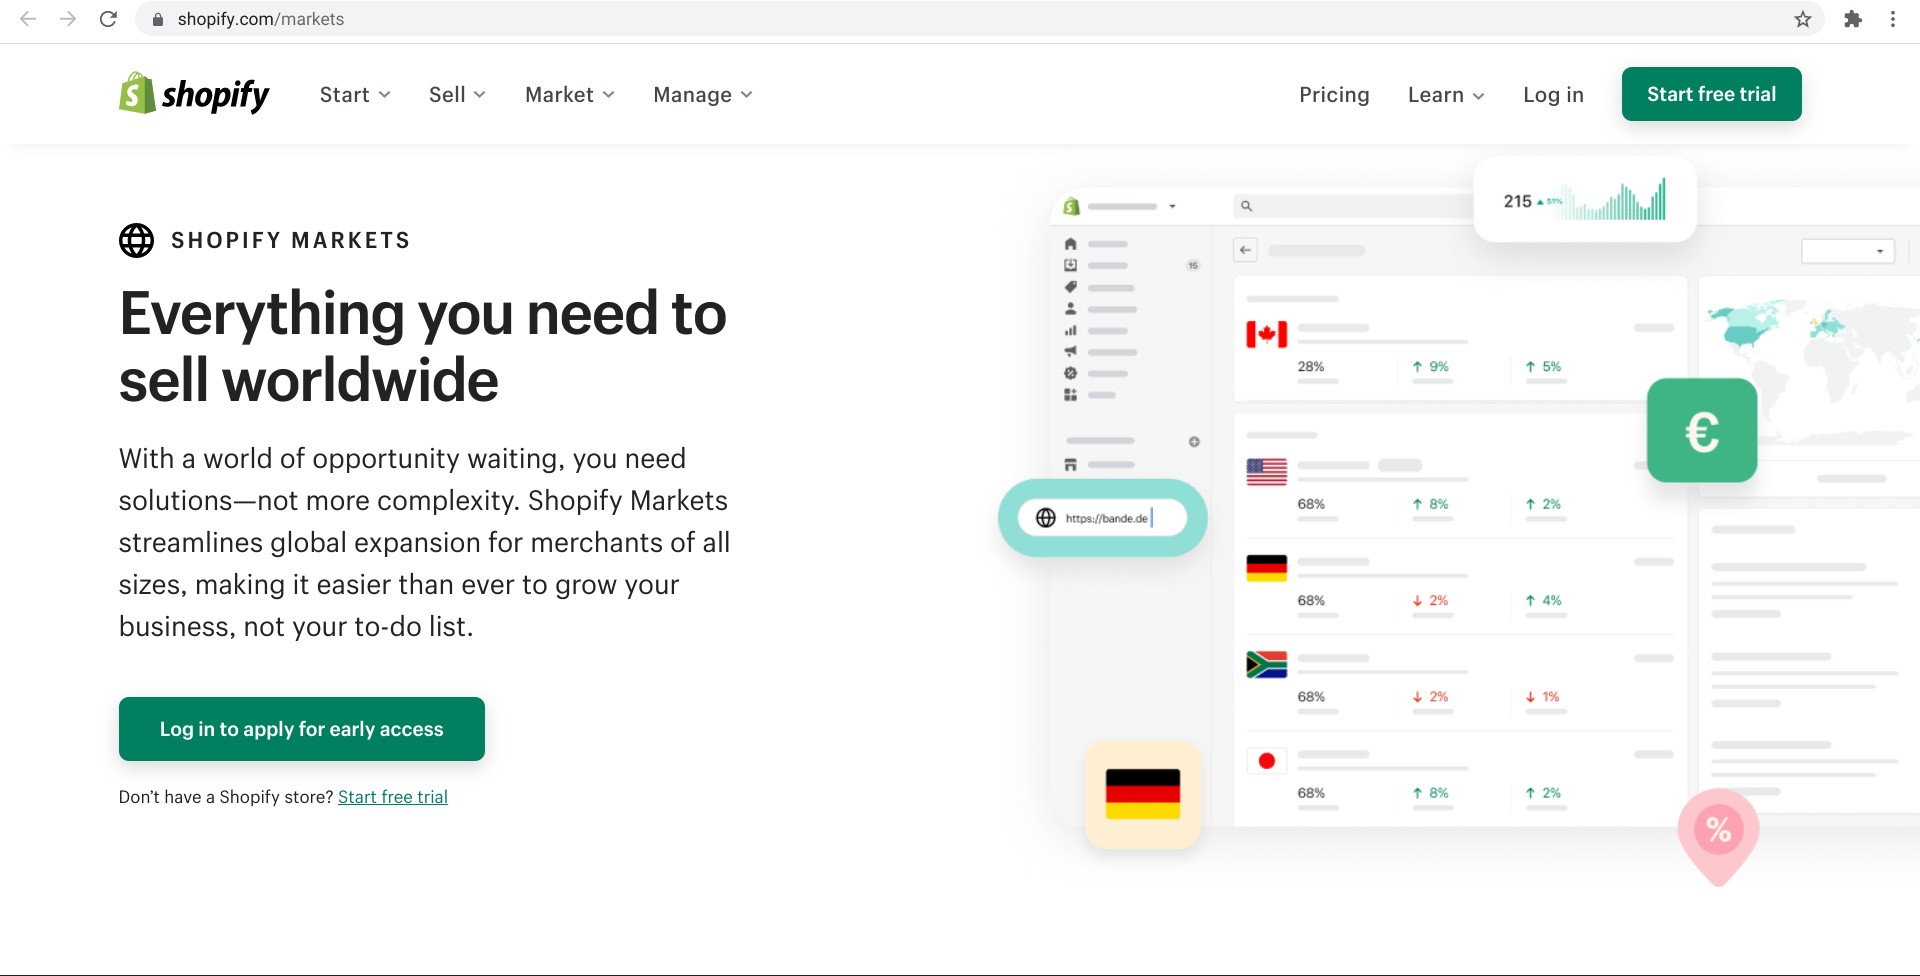 Screenshot of shopify.com/markets showcasing the new features